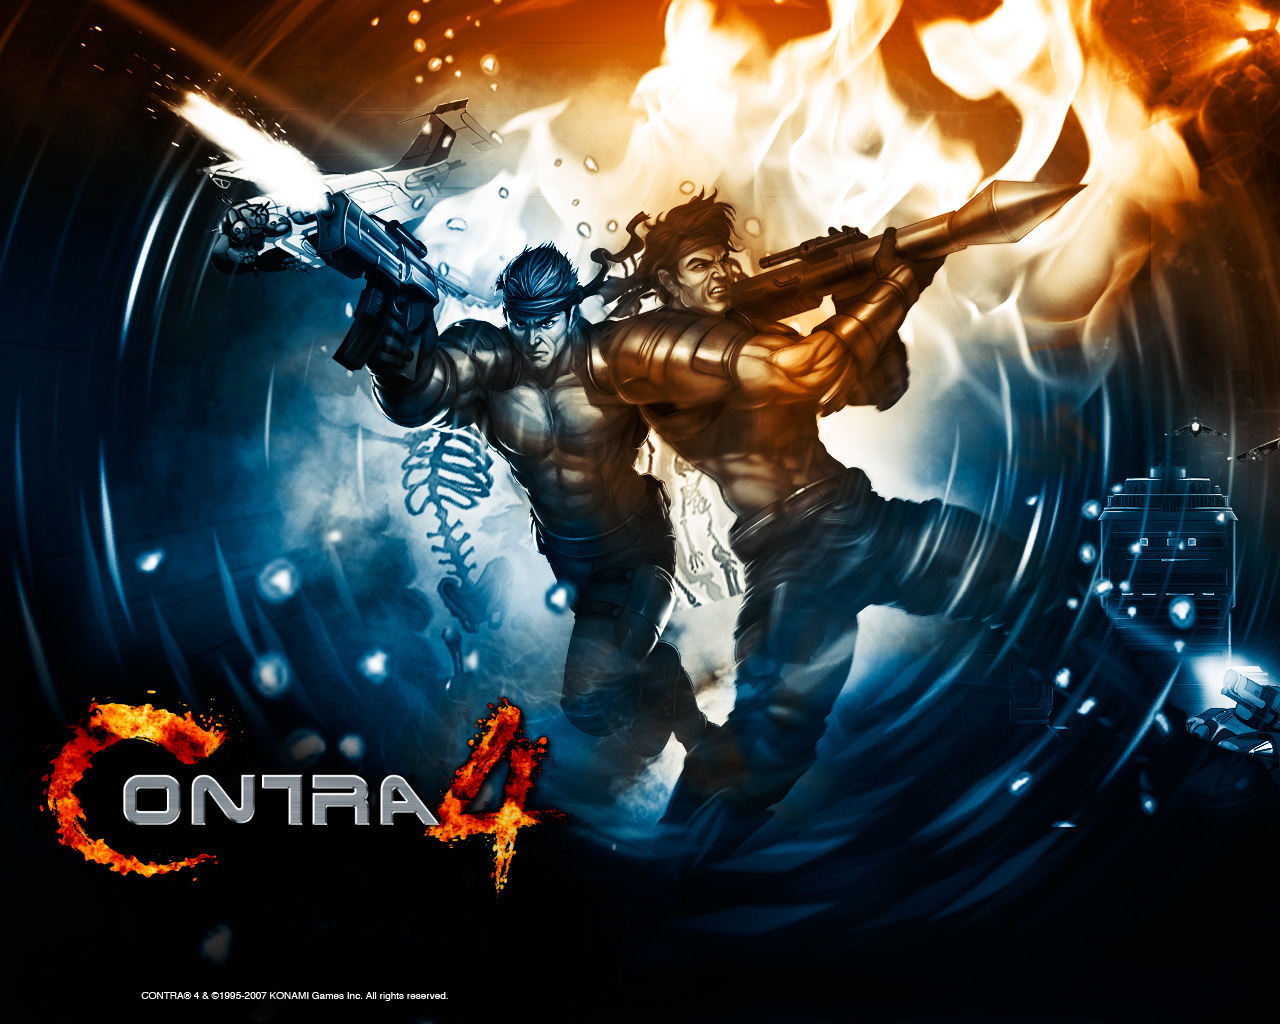 Contra 4 screenshots, images and pictures - Giant Bomb